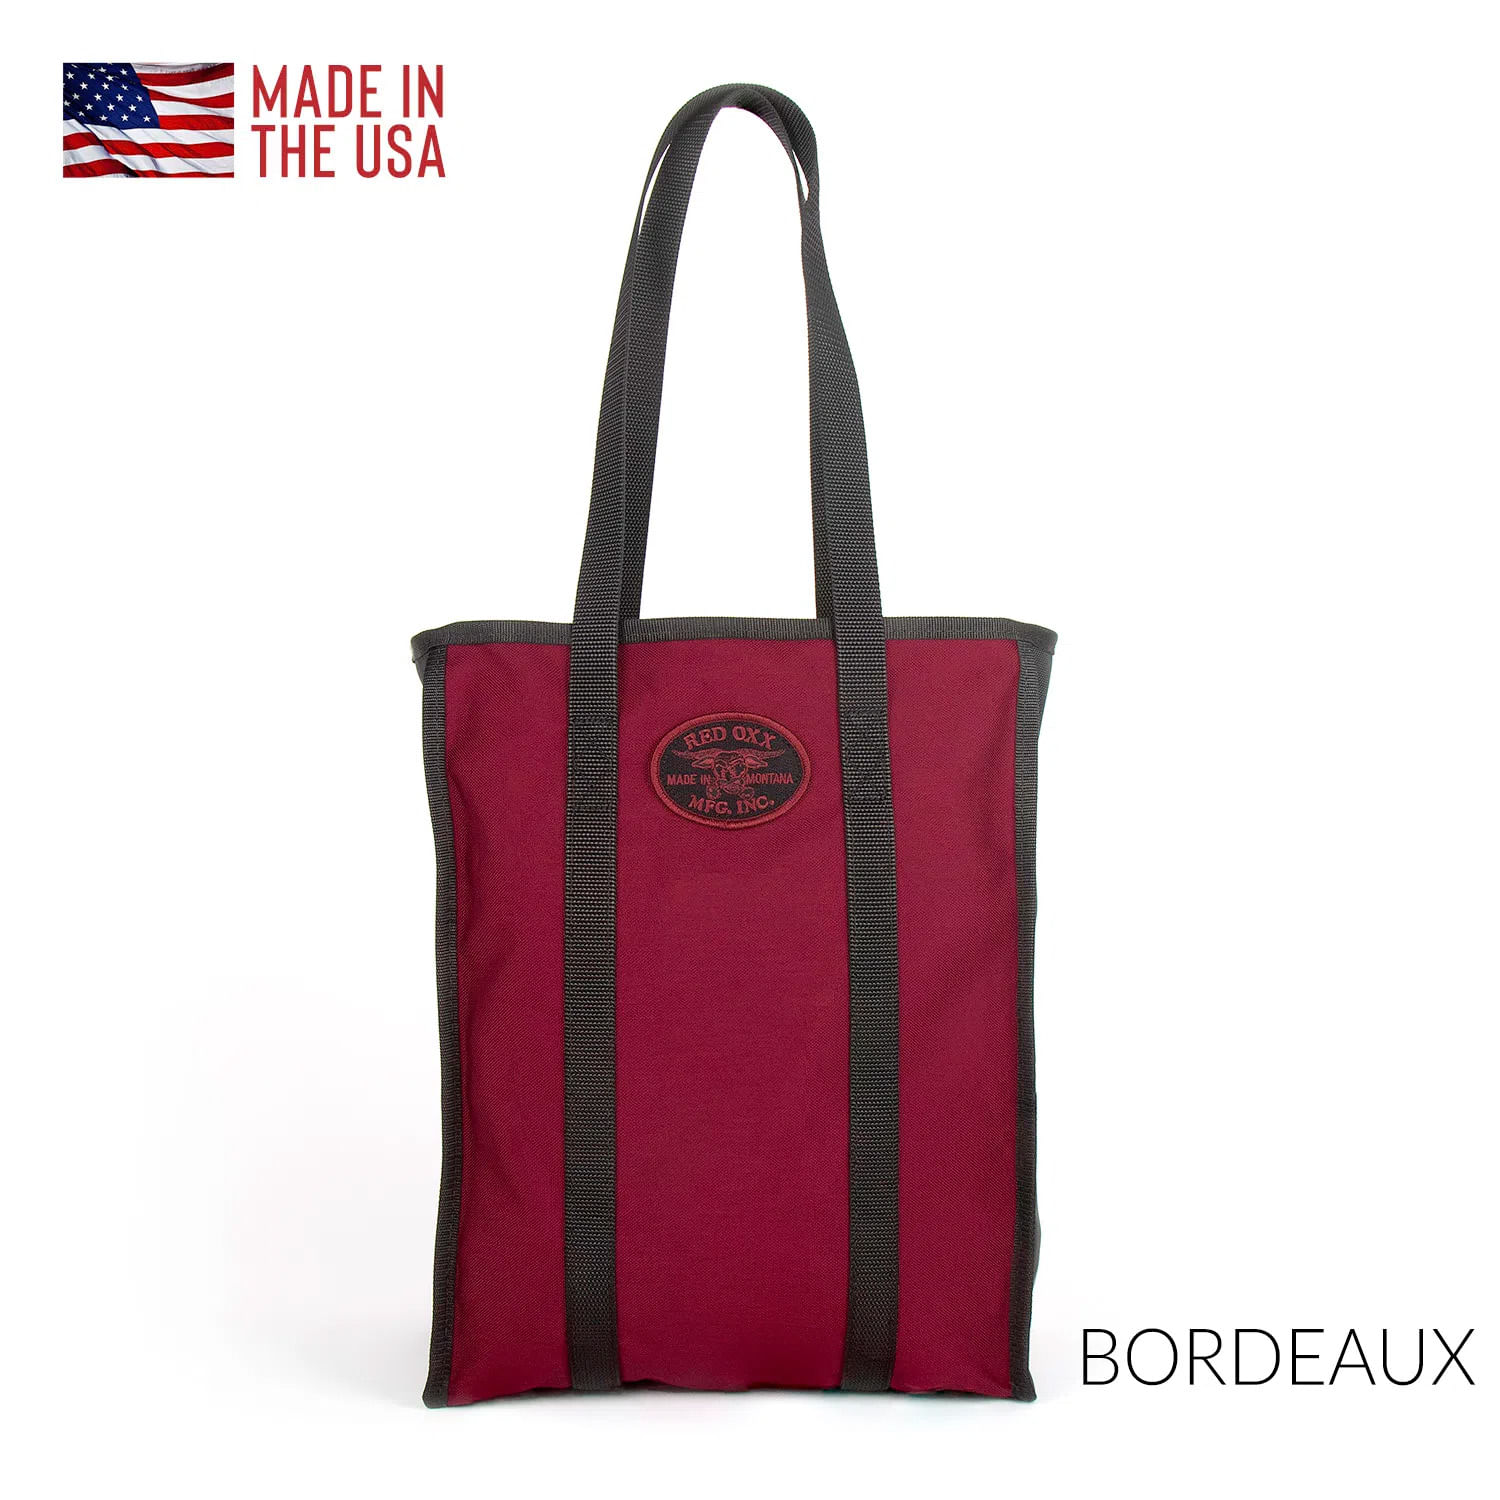 Market Tote Bag  Nylon Grocery Bag - Red Oxx